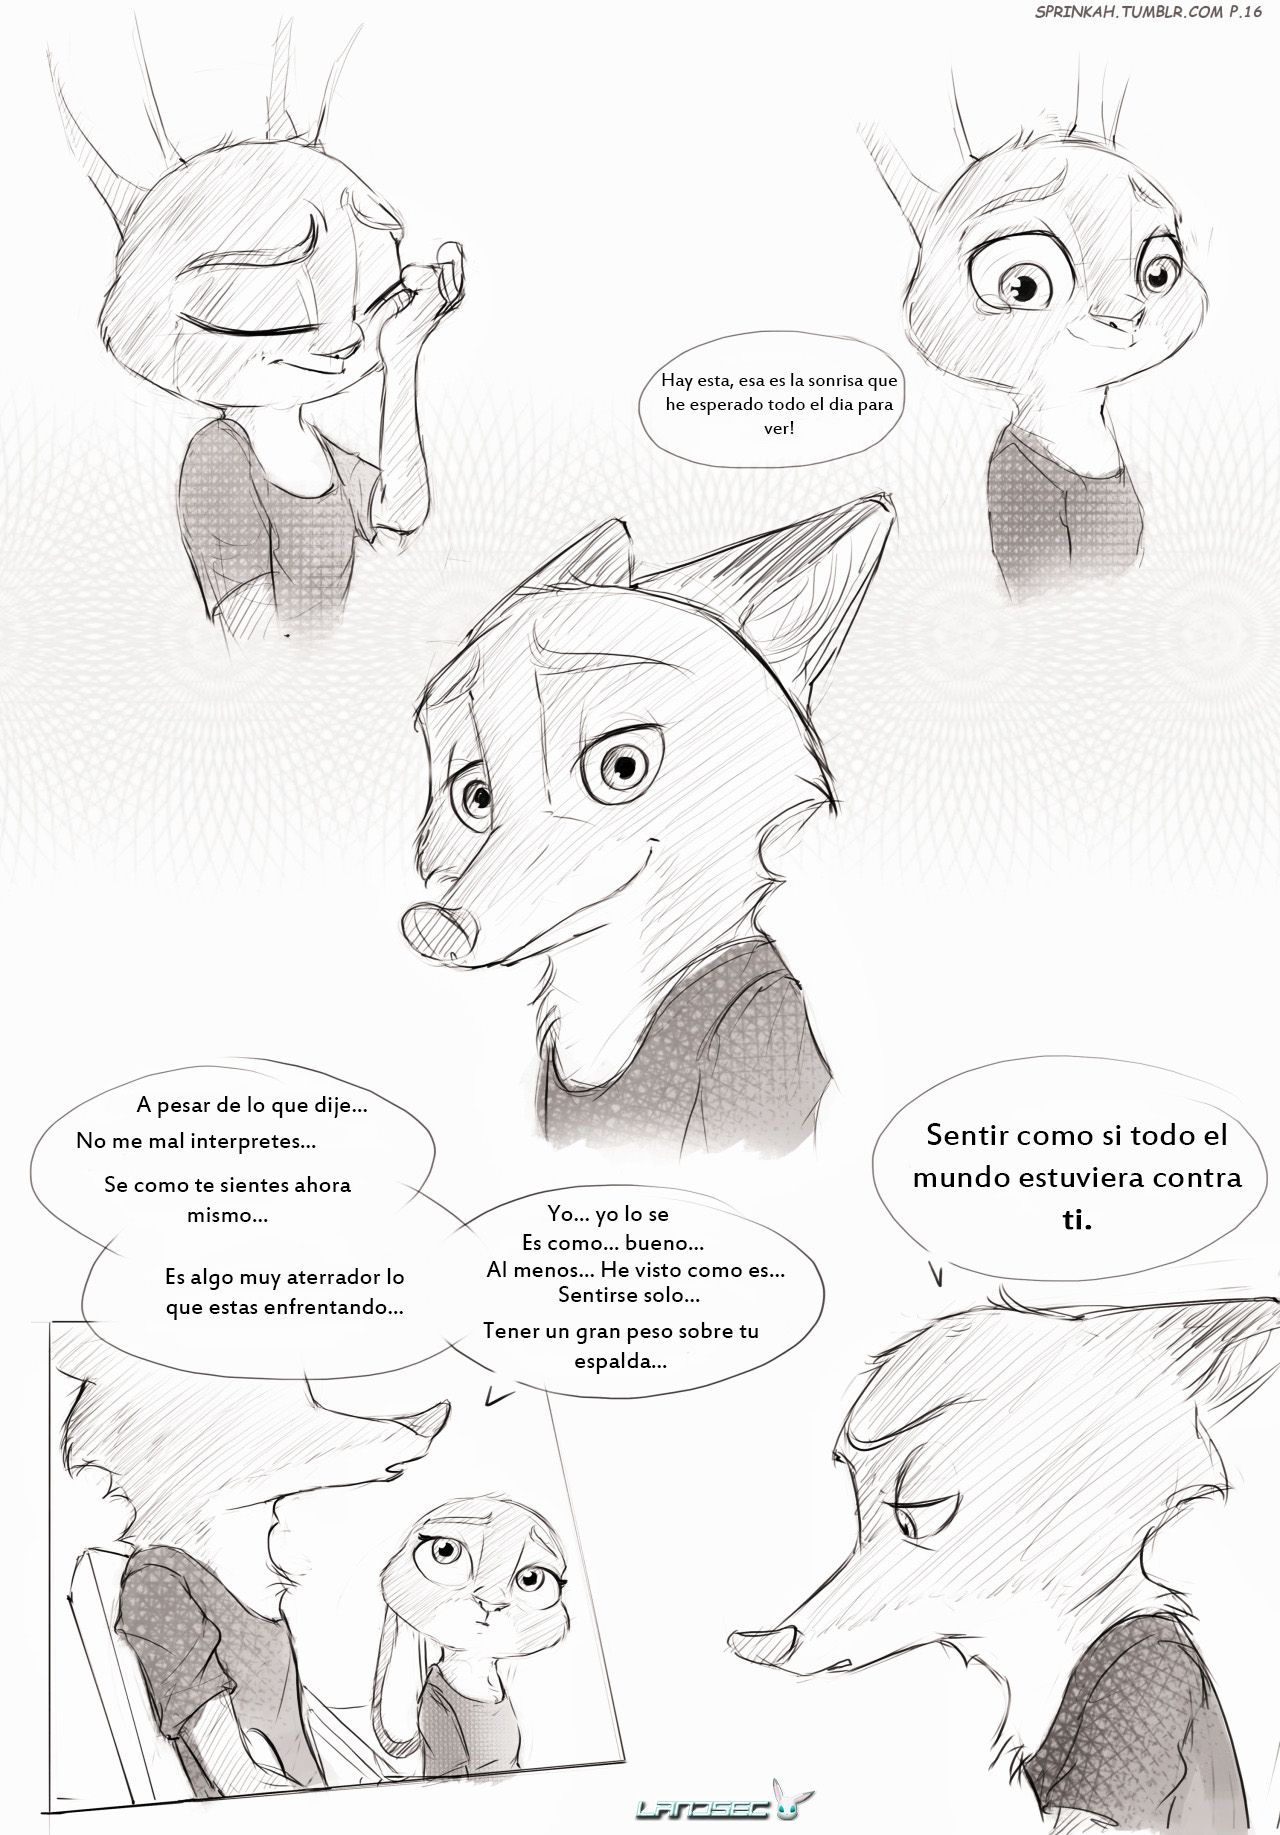 [Sprinkah] This is what true love looks like (Zootopia) (Spanish) (On Going) [Landsec] http://sprinkah.tumblr.com/ 27